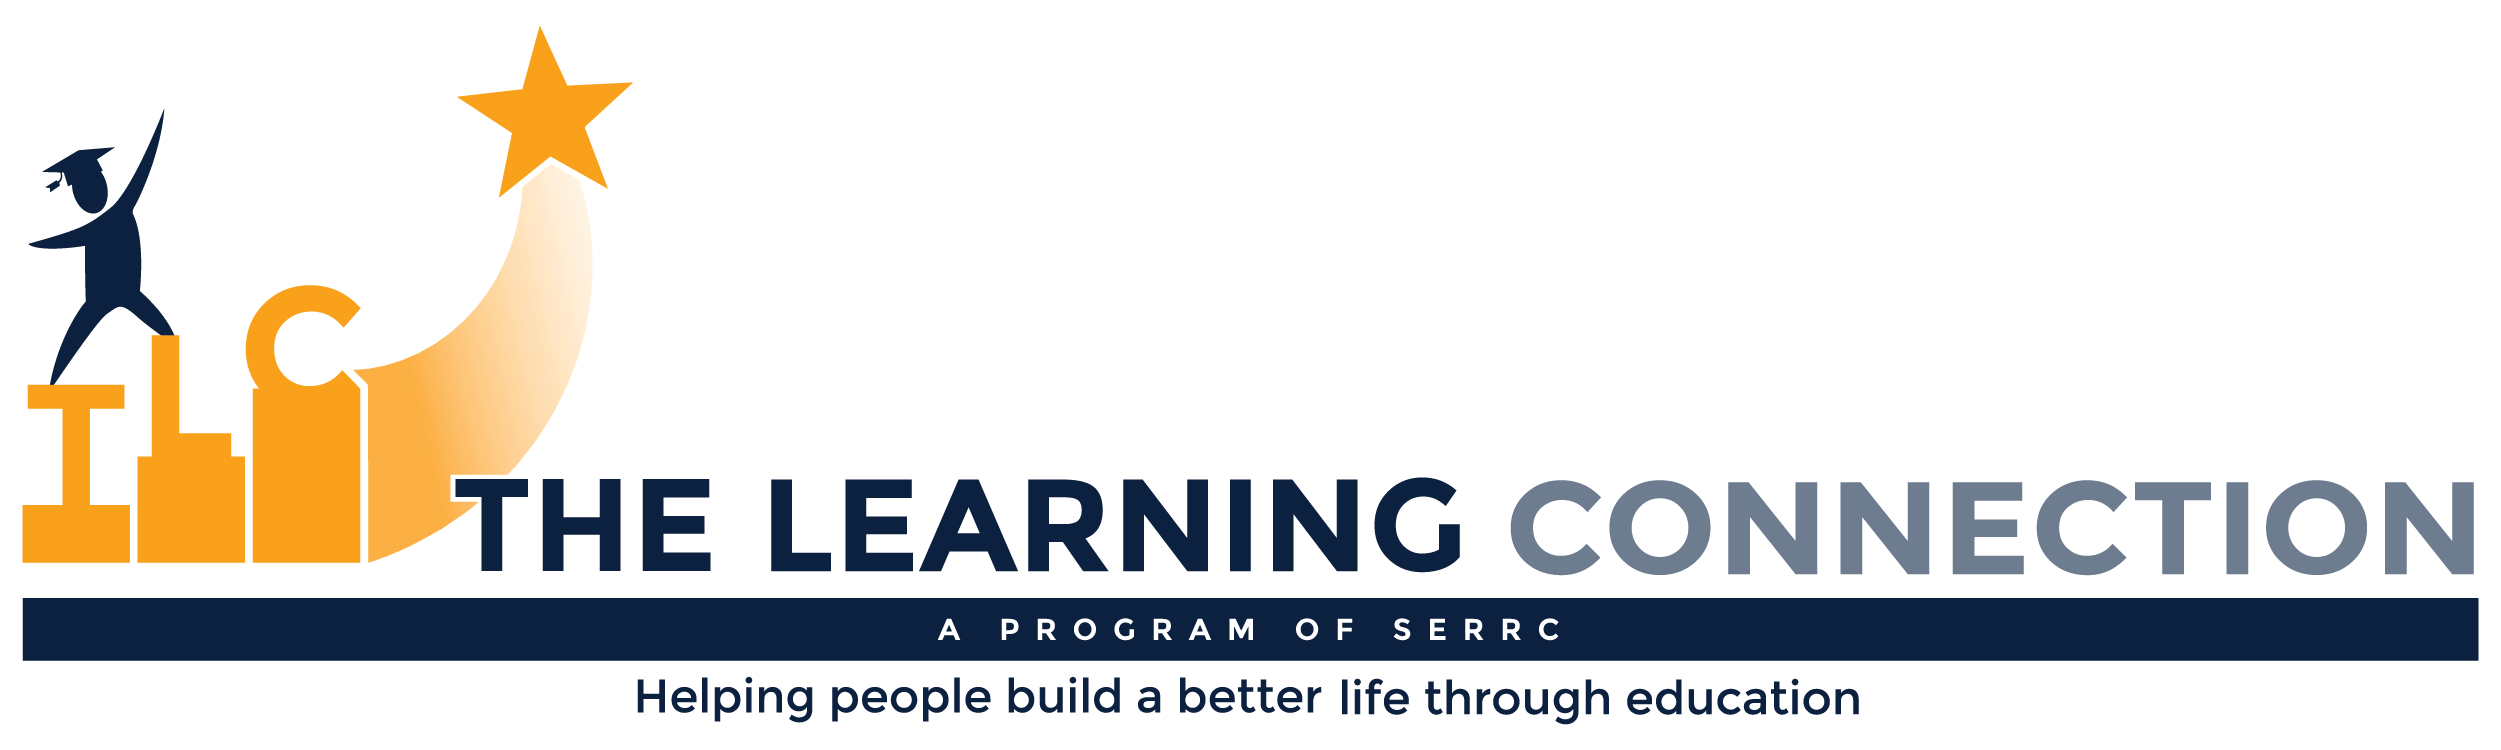 The Learning Connection